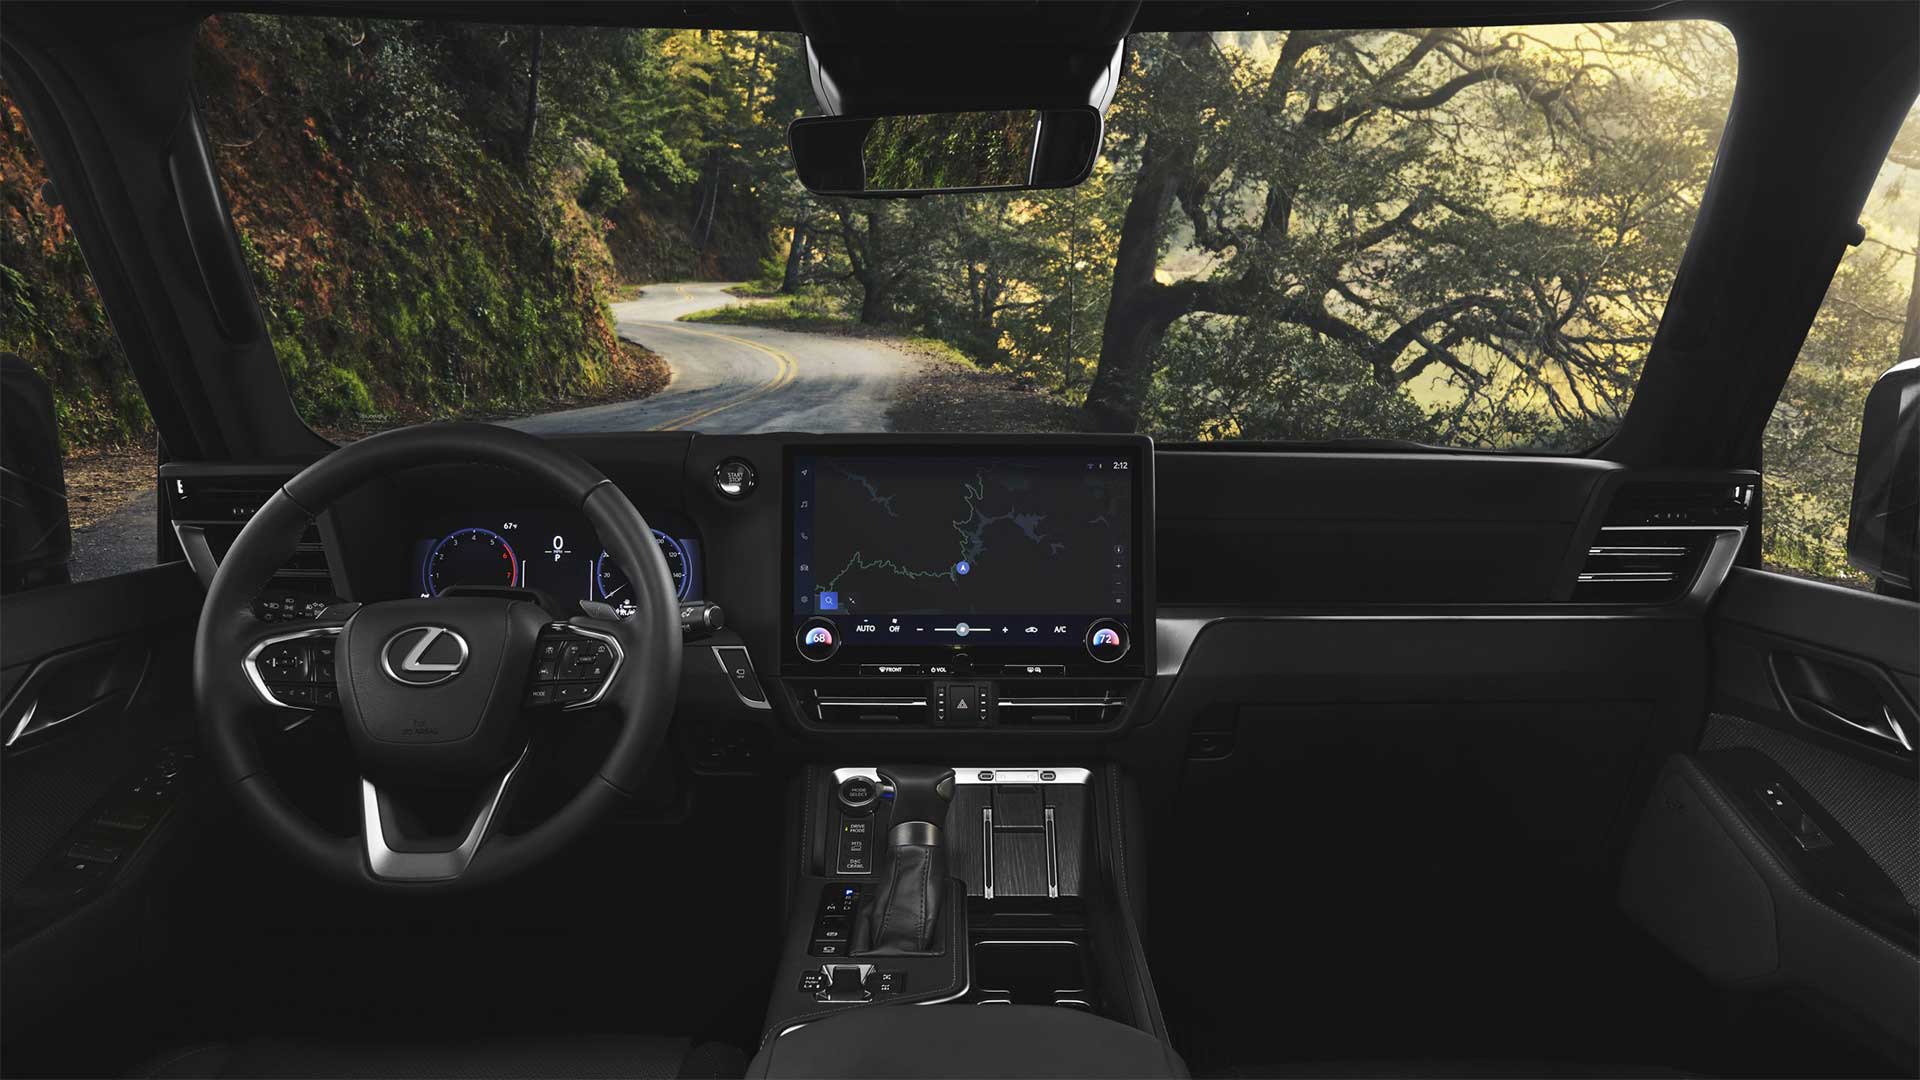 View of the Lexus GX dashboard and steering wheel. Outside is a view of a winding country road with green trees on either side. 